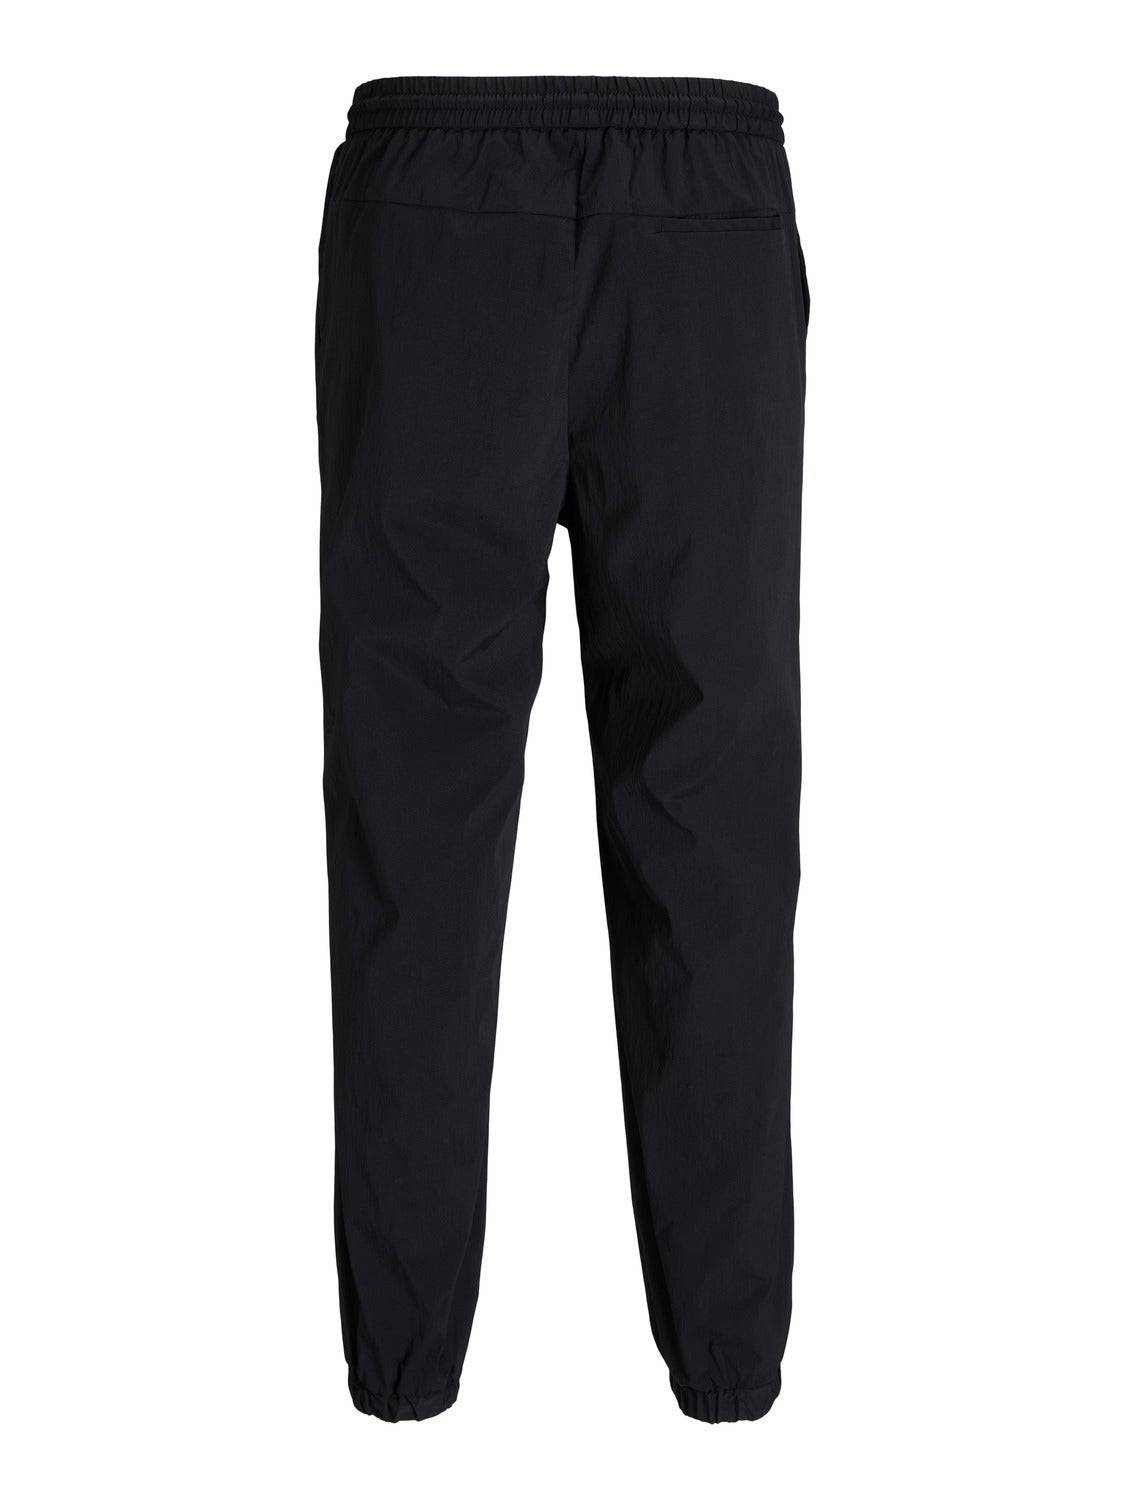 Only & Sons loose fit sweatpants with taping detail in navy | ASOS